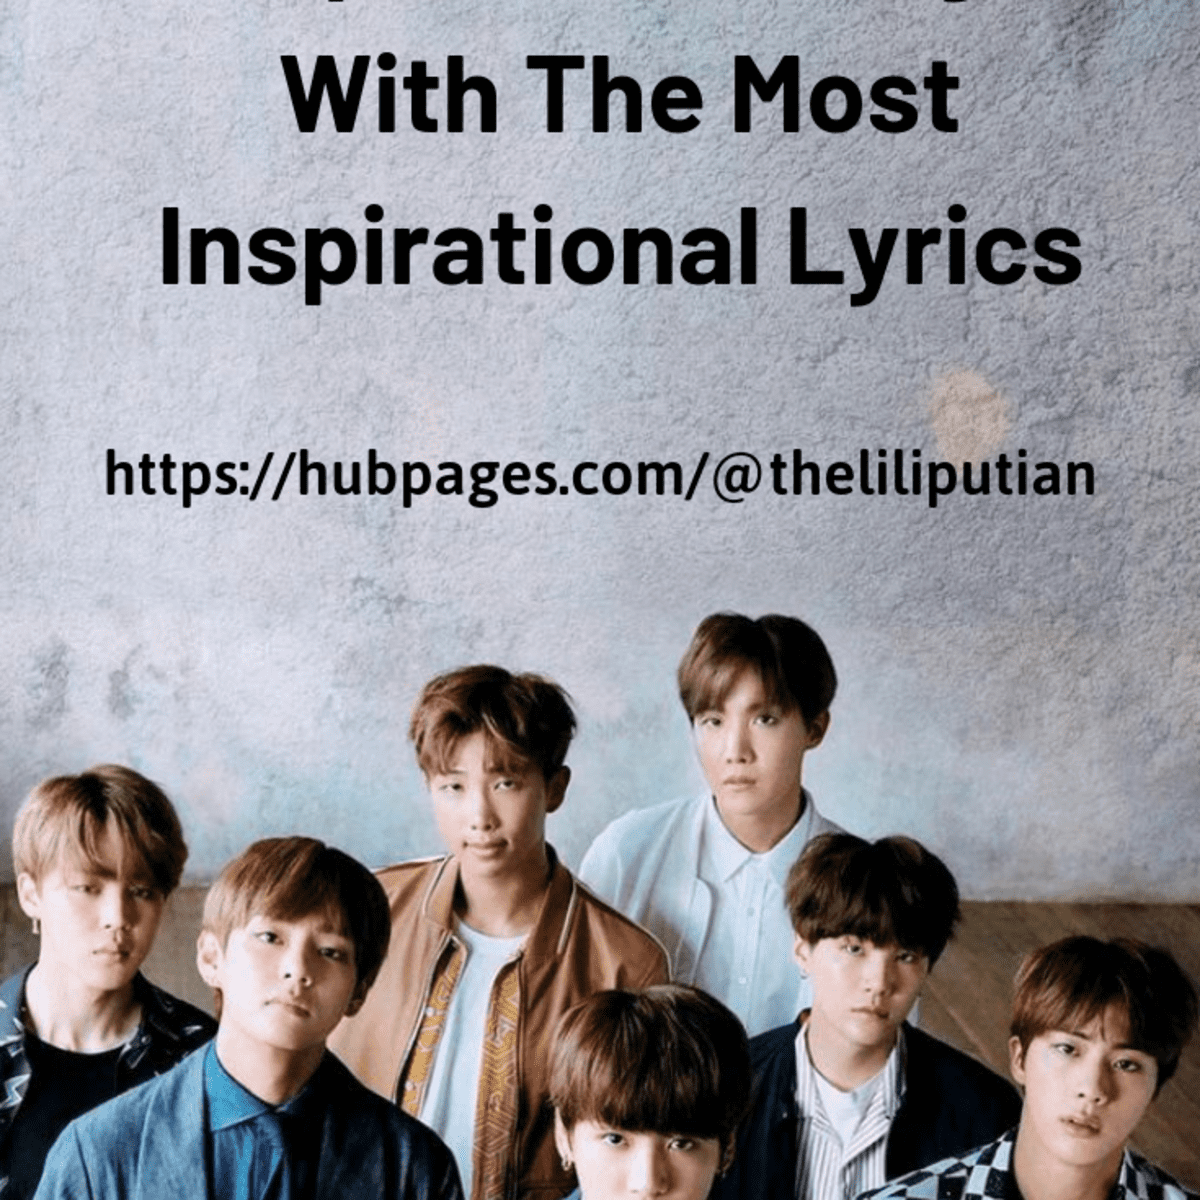 Top 10 Bts Songs With The Most Inspirational Lyrics - Hubpages